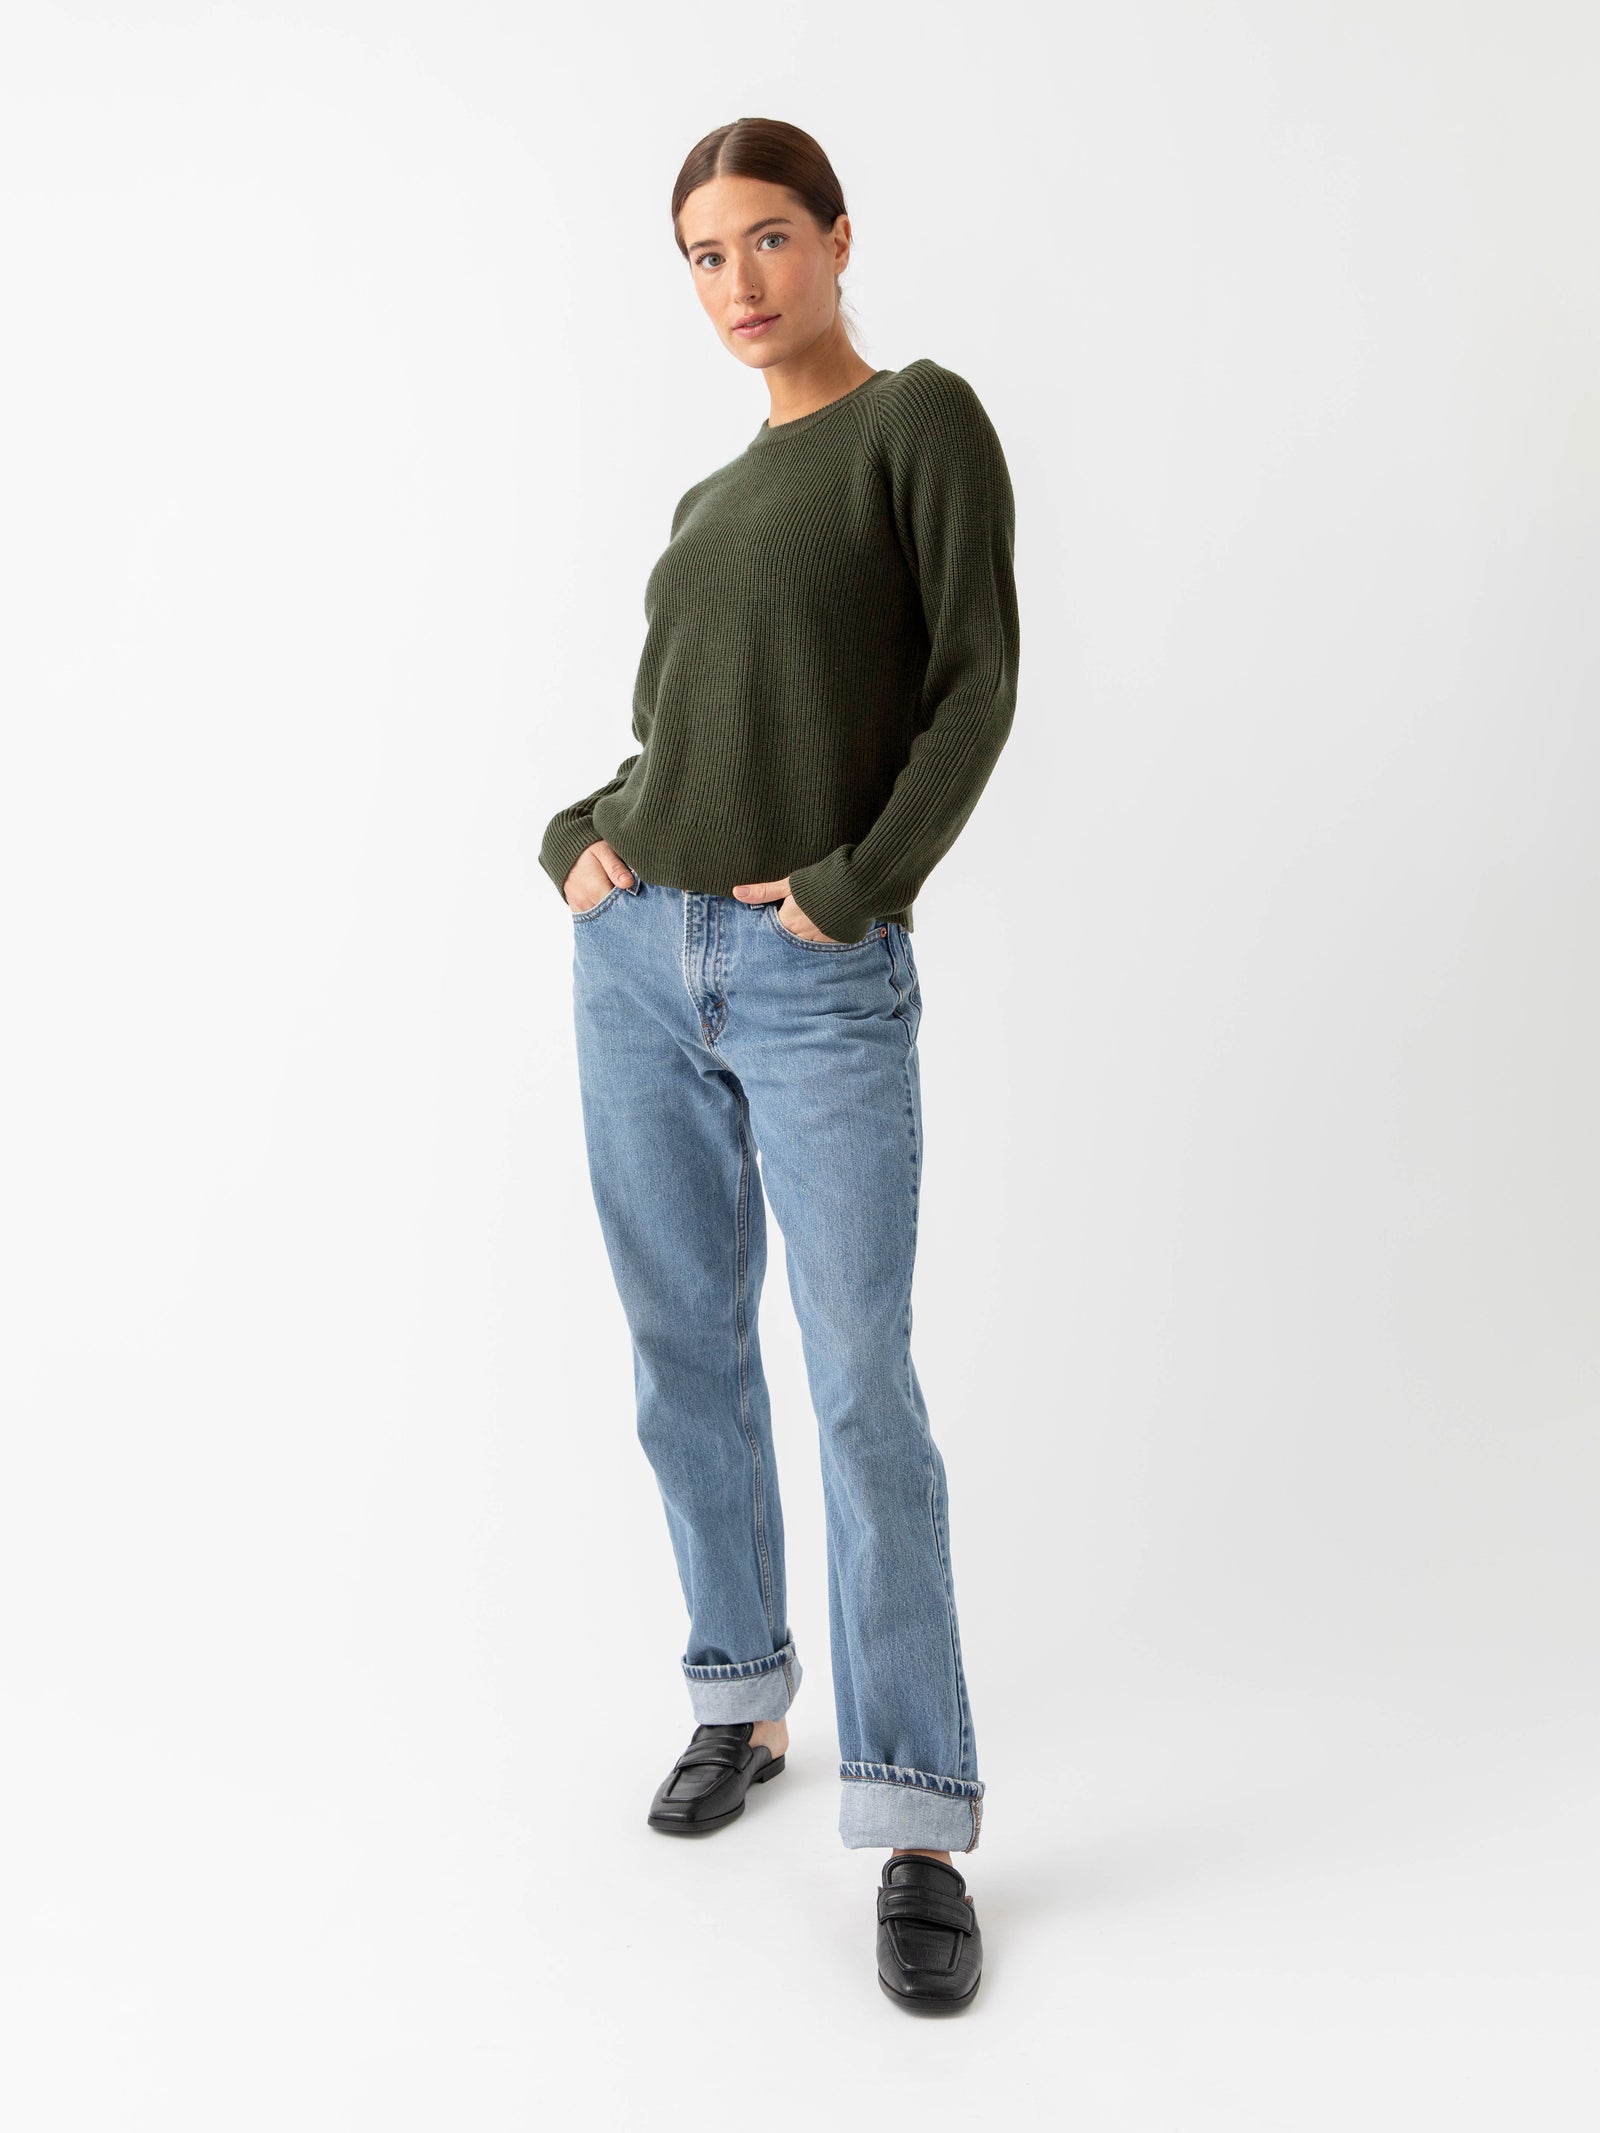 Woman wearing juniper classic crewneck and jeans with white background 